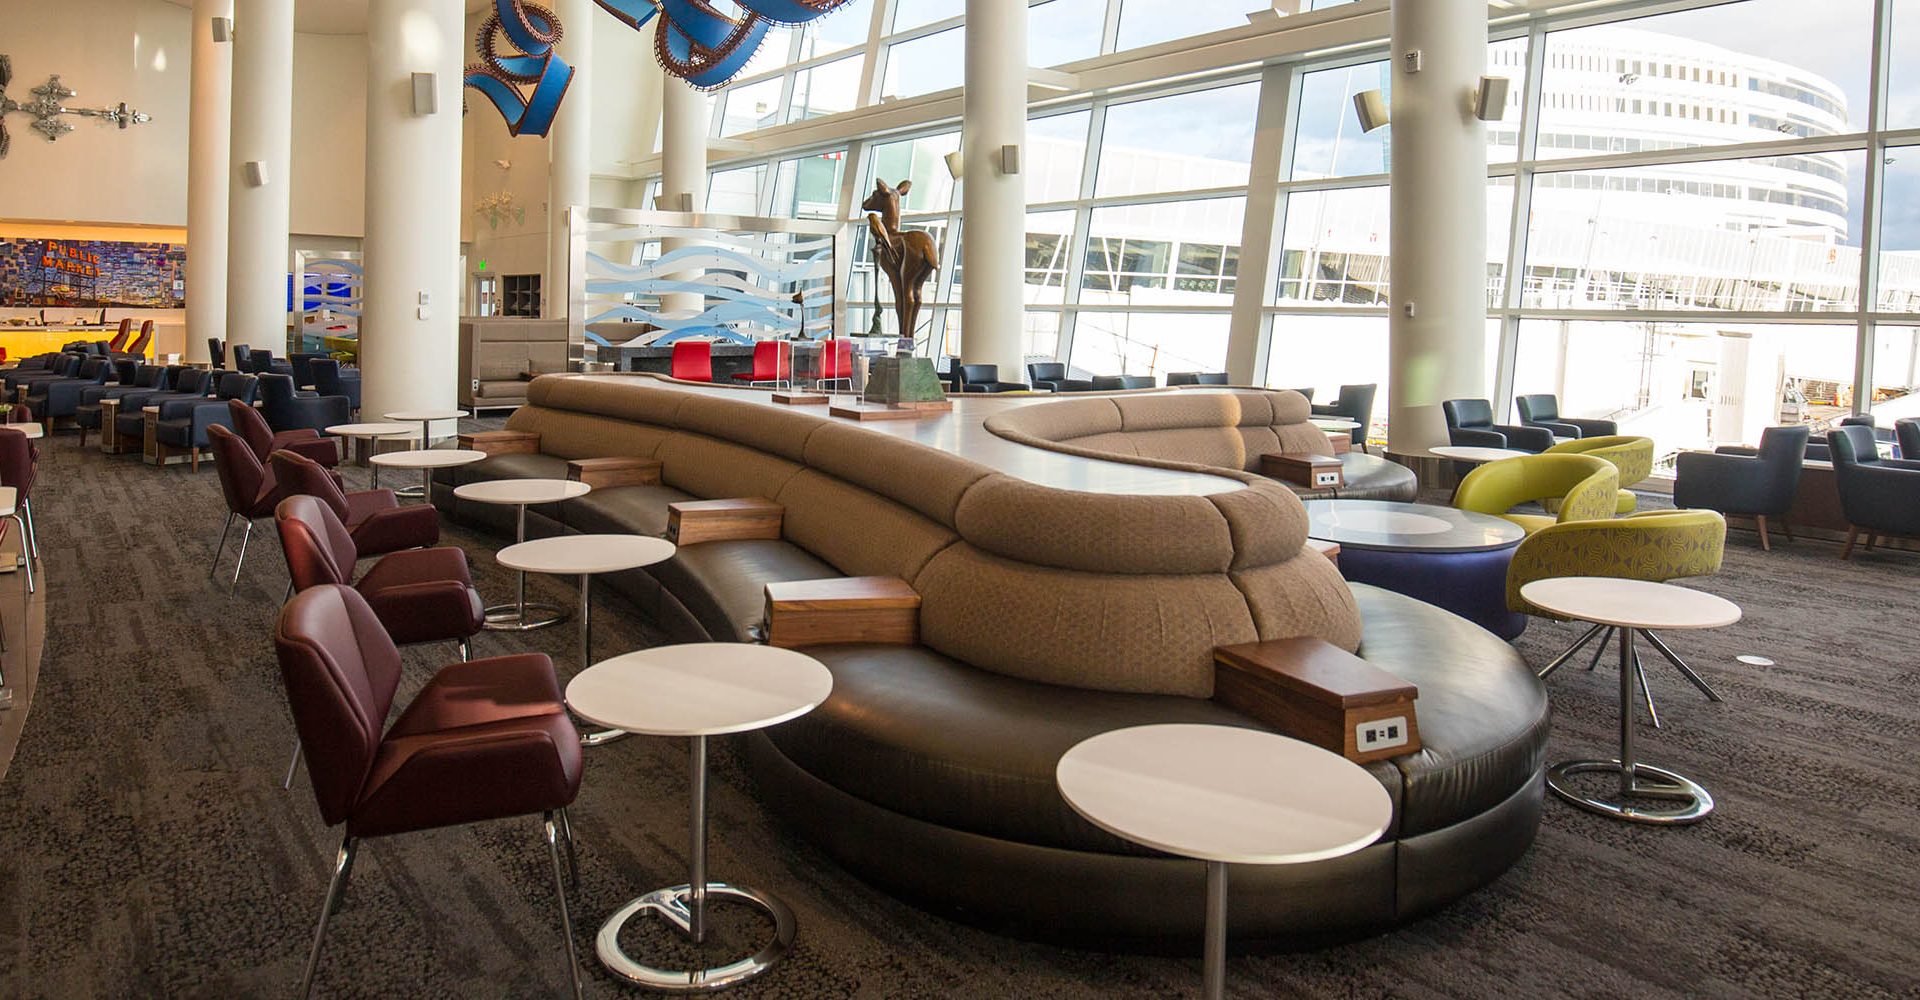 How To Get Into The Delta Sky Club Before Your Flight Nerdwallet